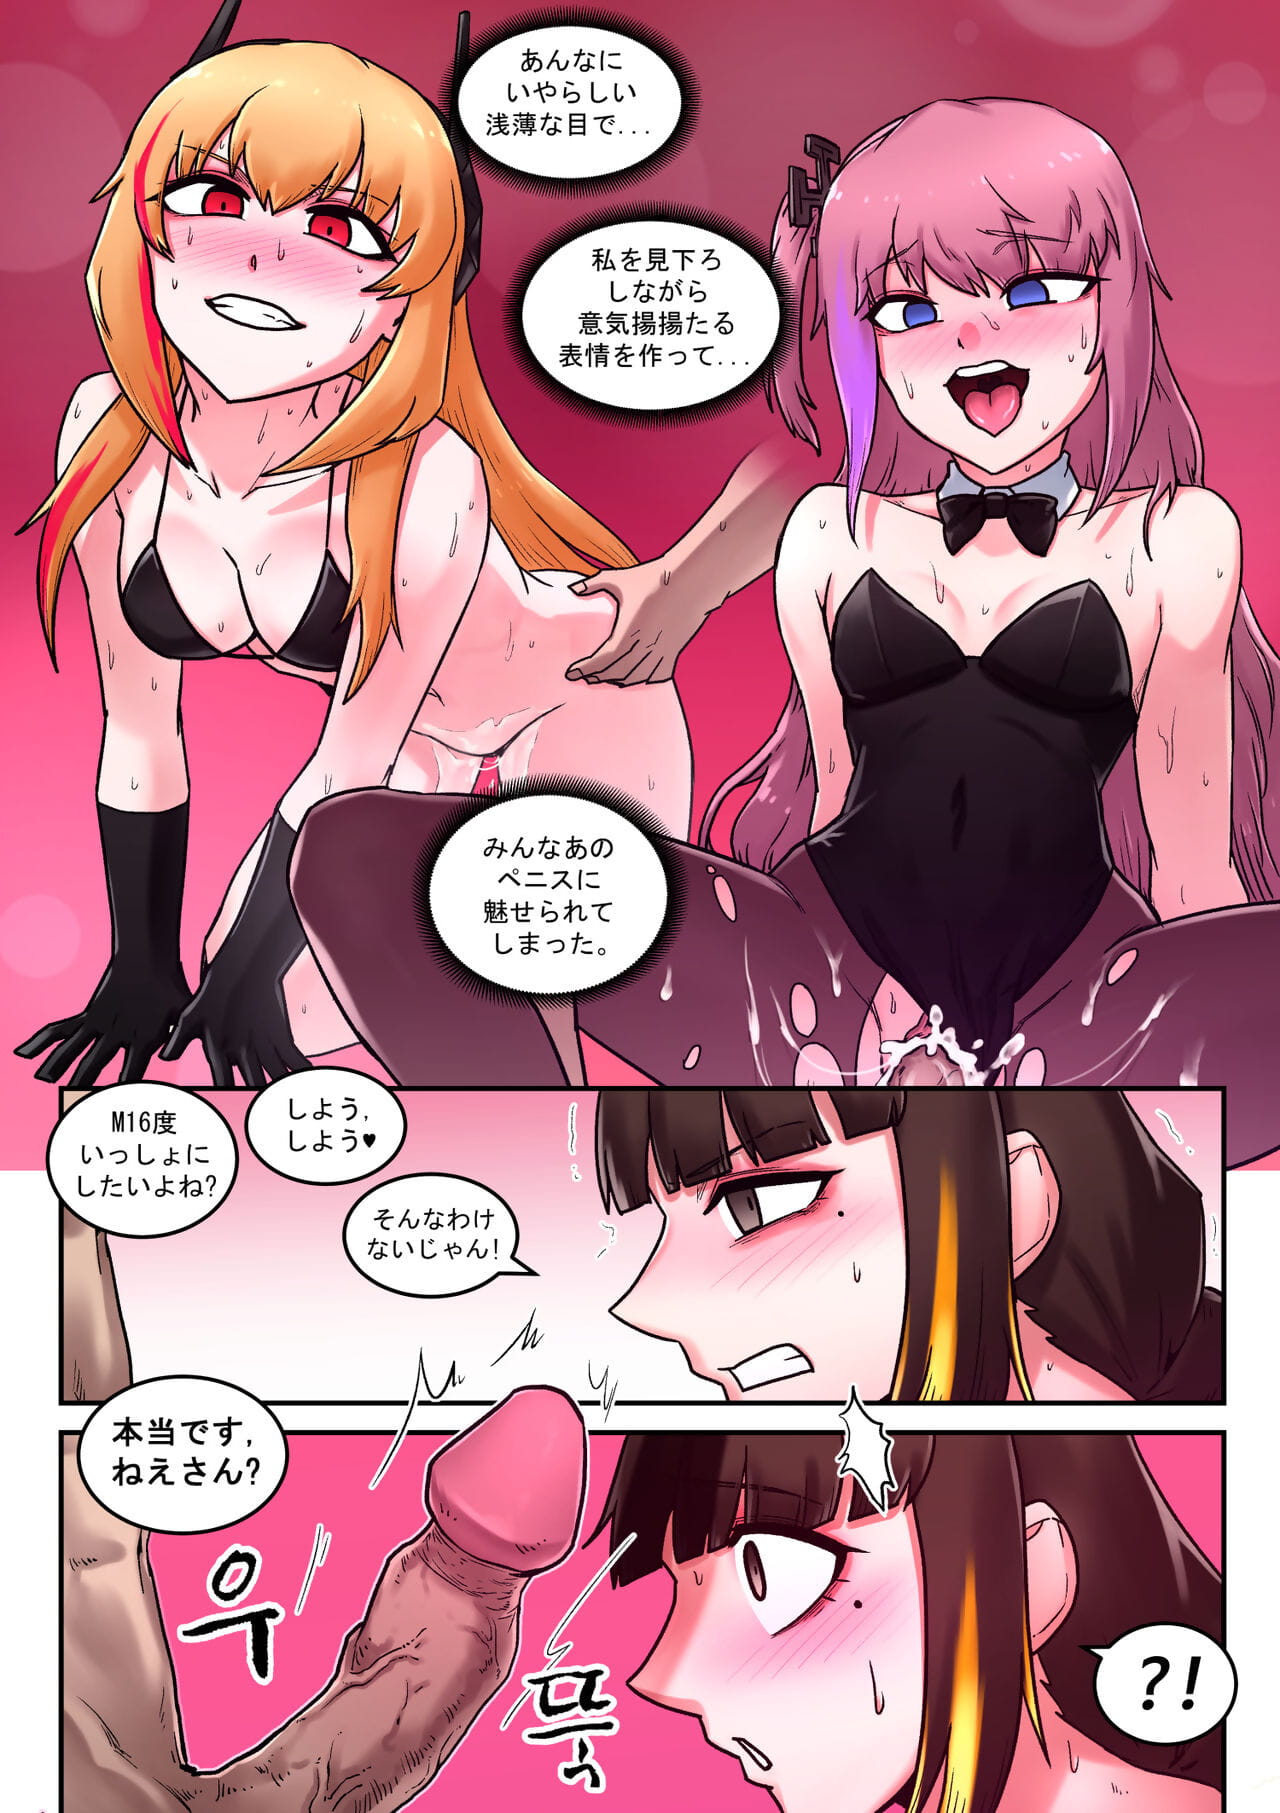 M コミック page 1